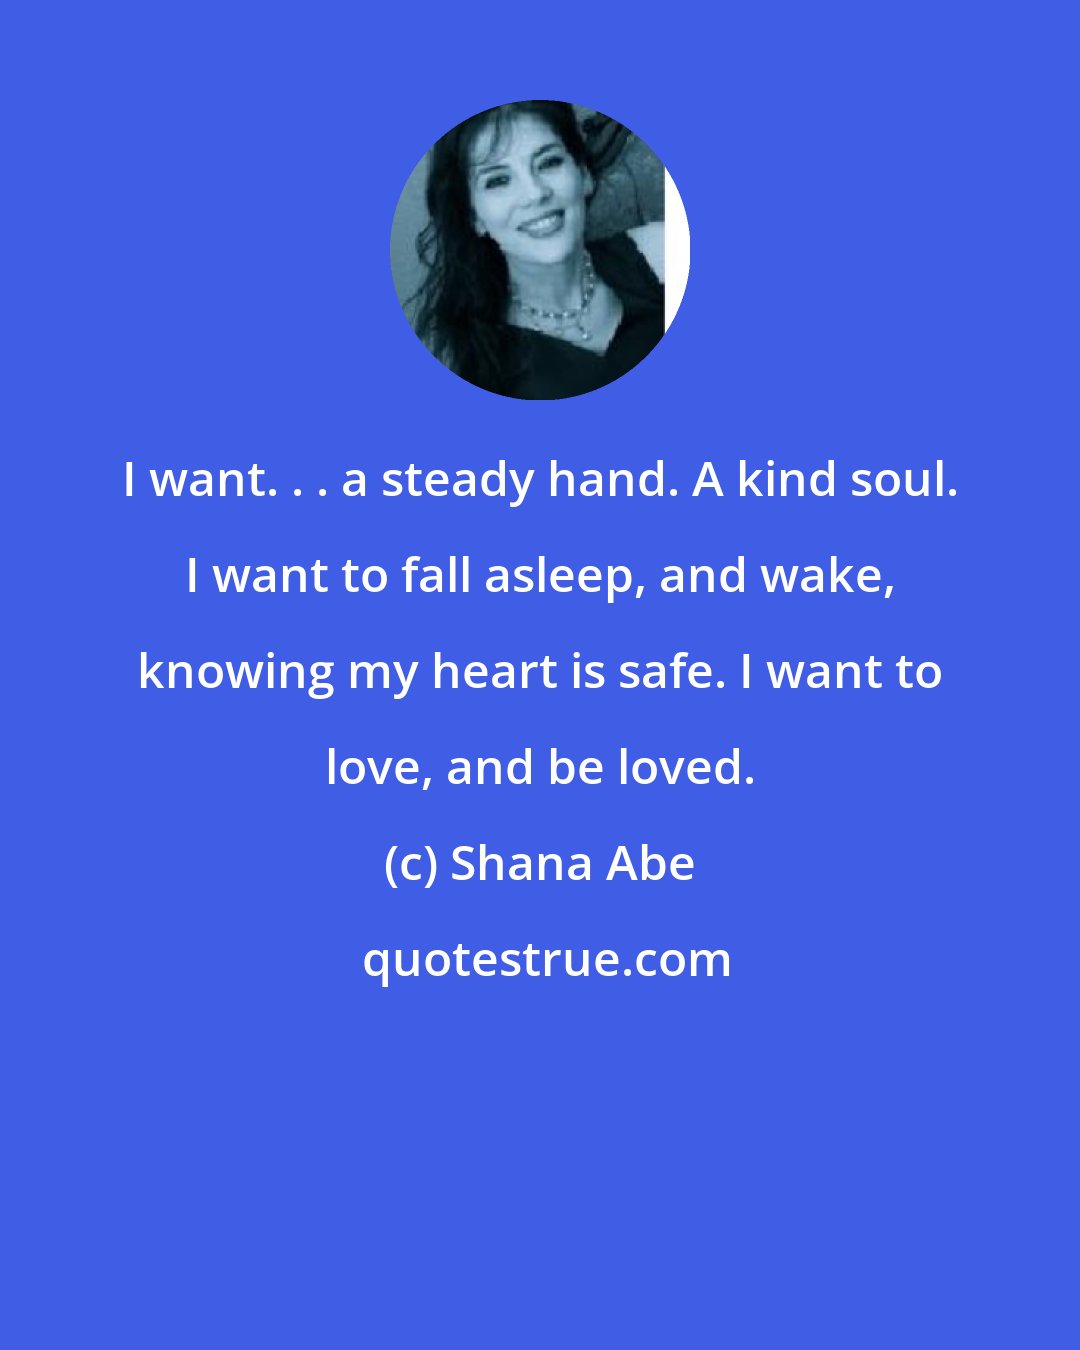 Shana Abe: I want. . . a steady hand. A kind soul. I want to fall asleep, and wake, knowing my heart is safe. I want to love, and be loved.